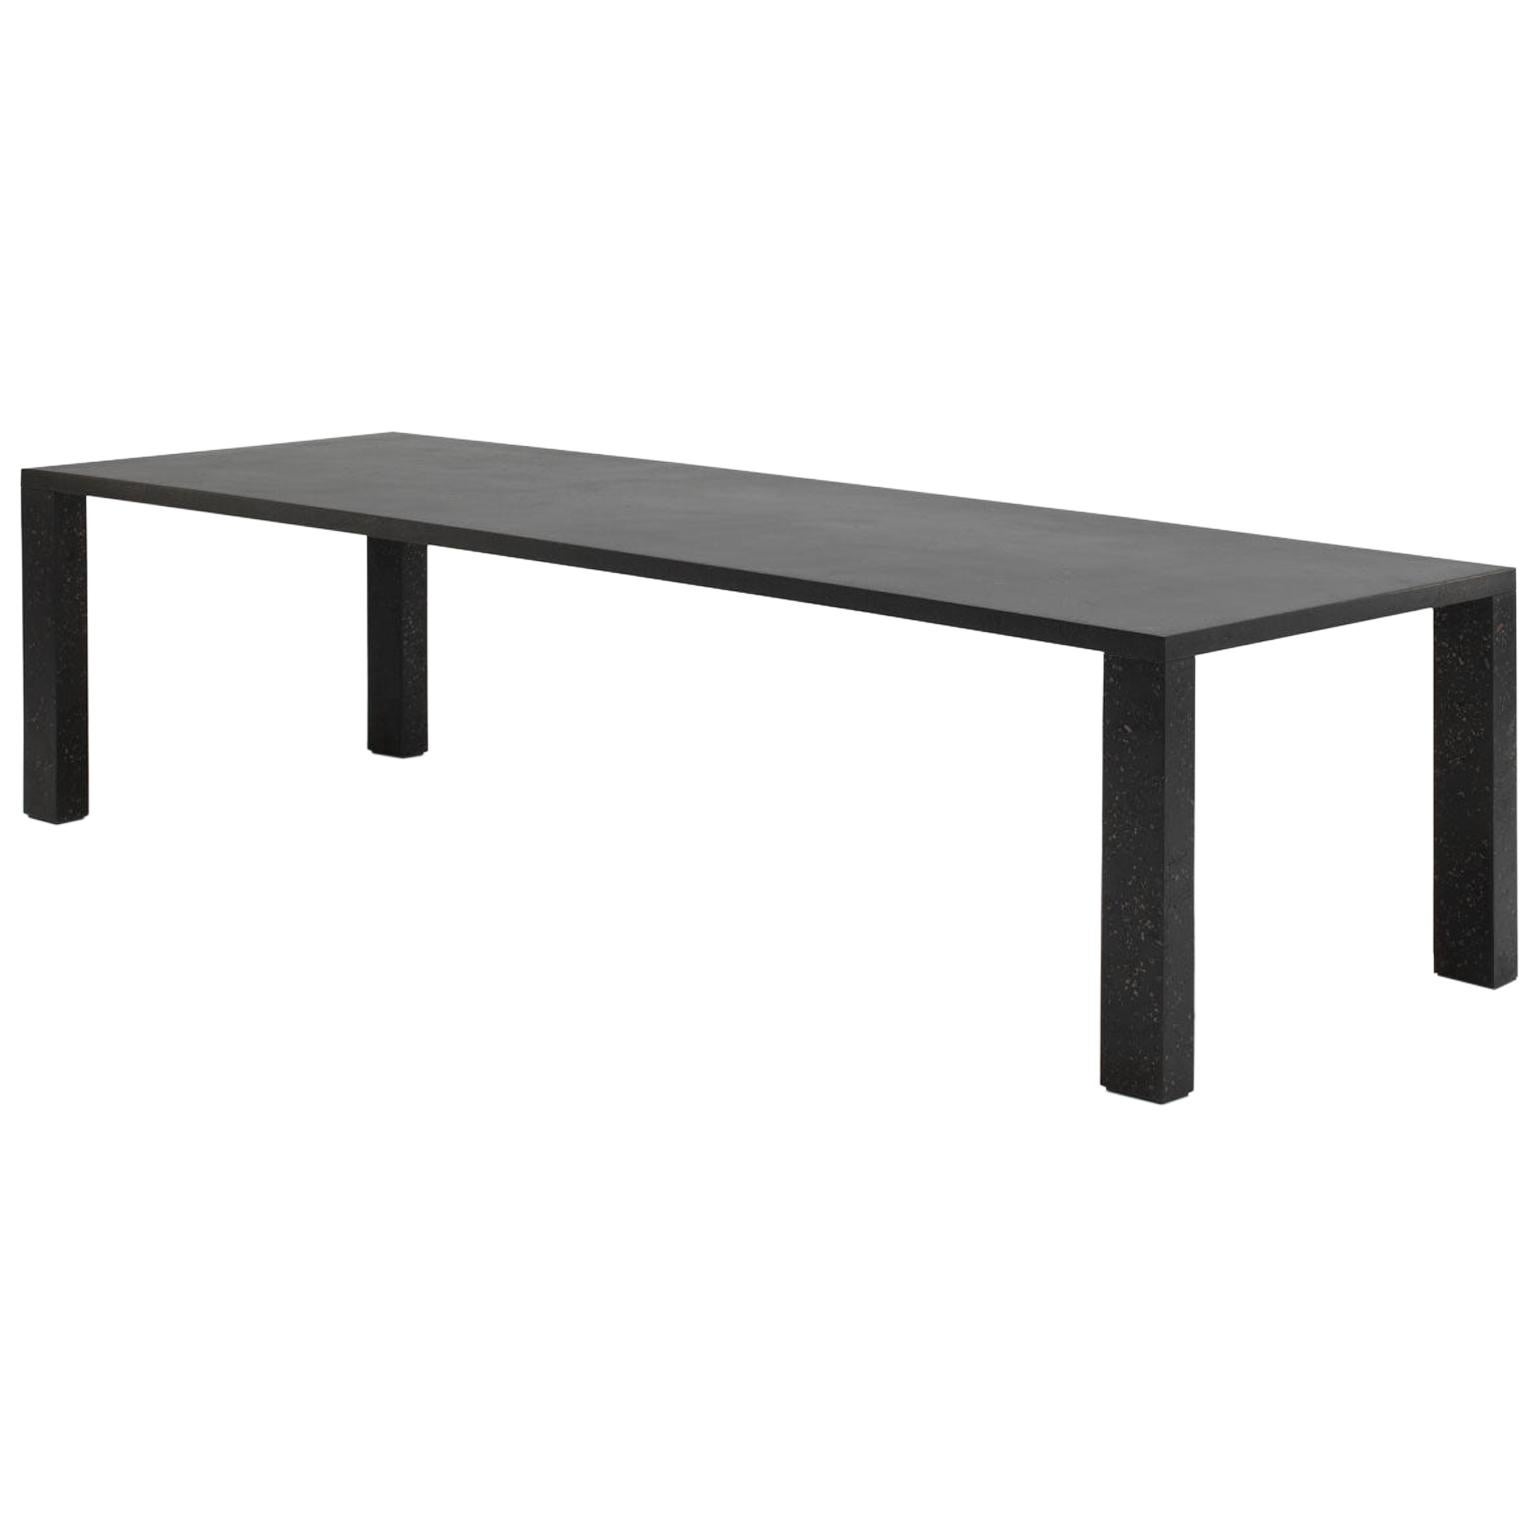 Black Rectangular Dining or Conference Table by De Sede